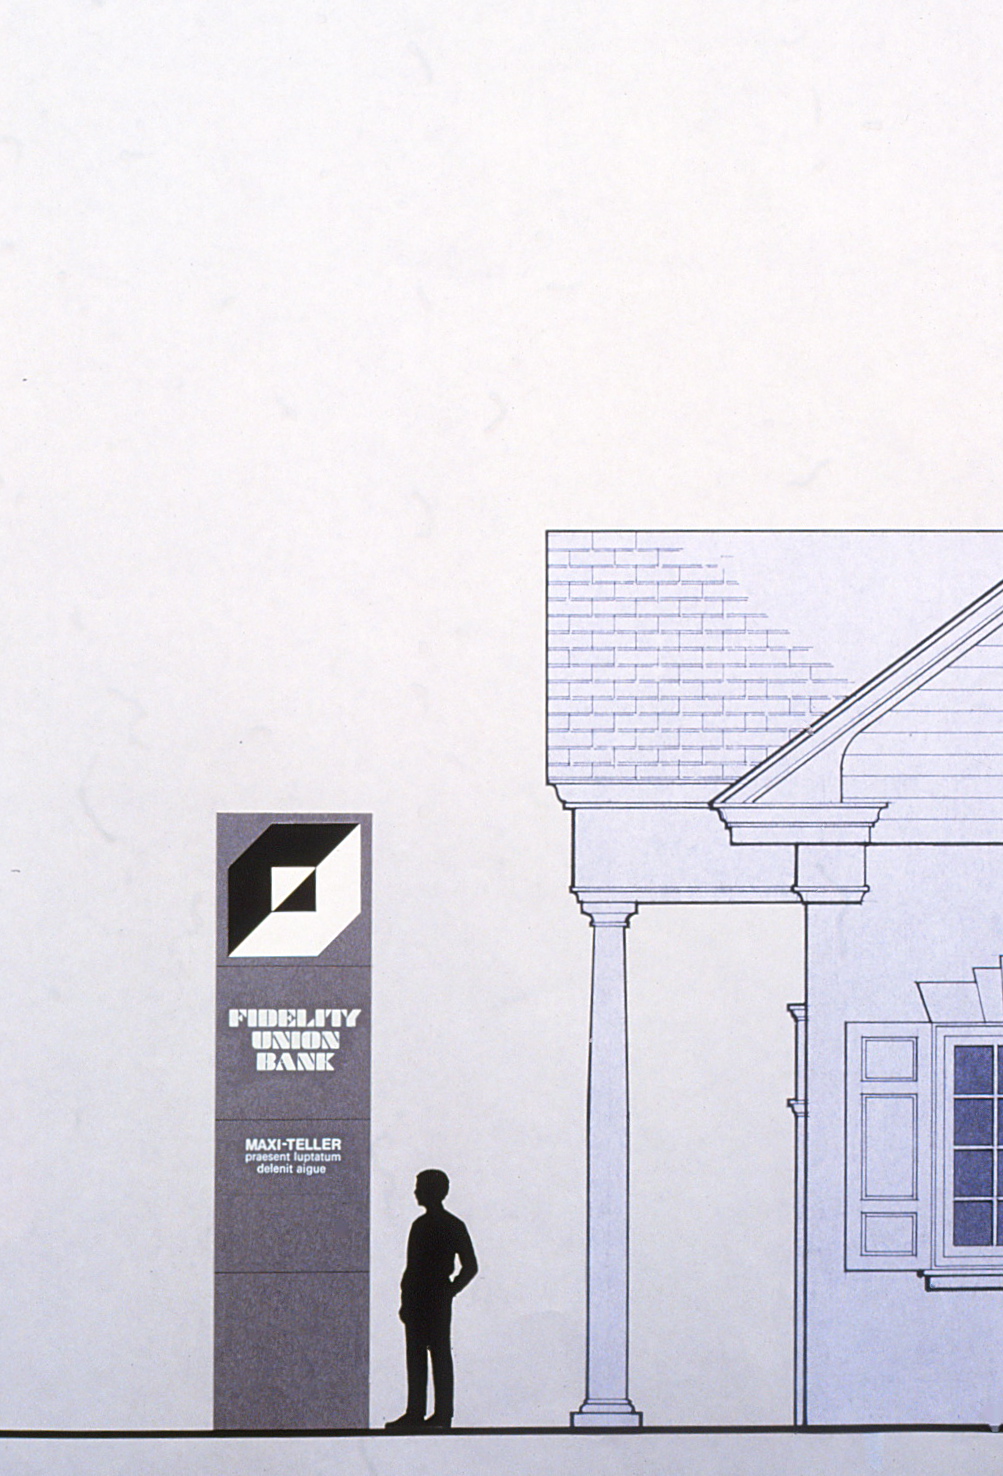 Elevation drawing featuring a pylon with logo and typface beside a typical bank branch structure with columns.